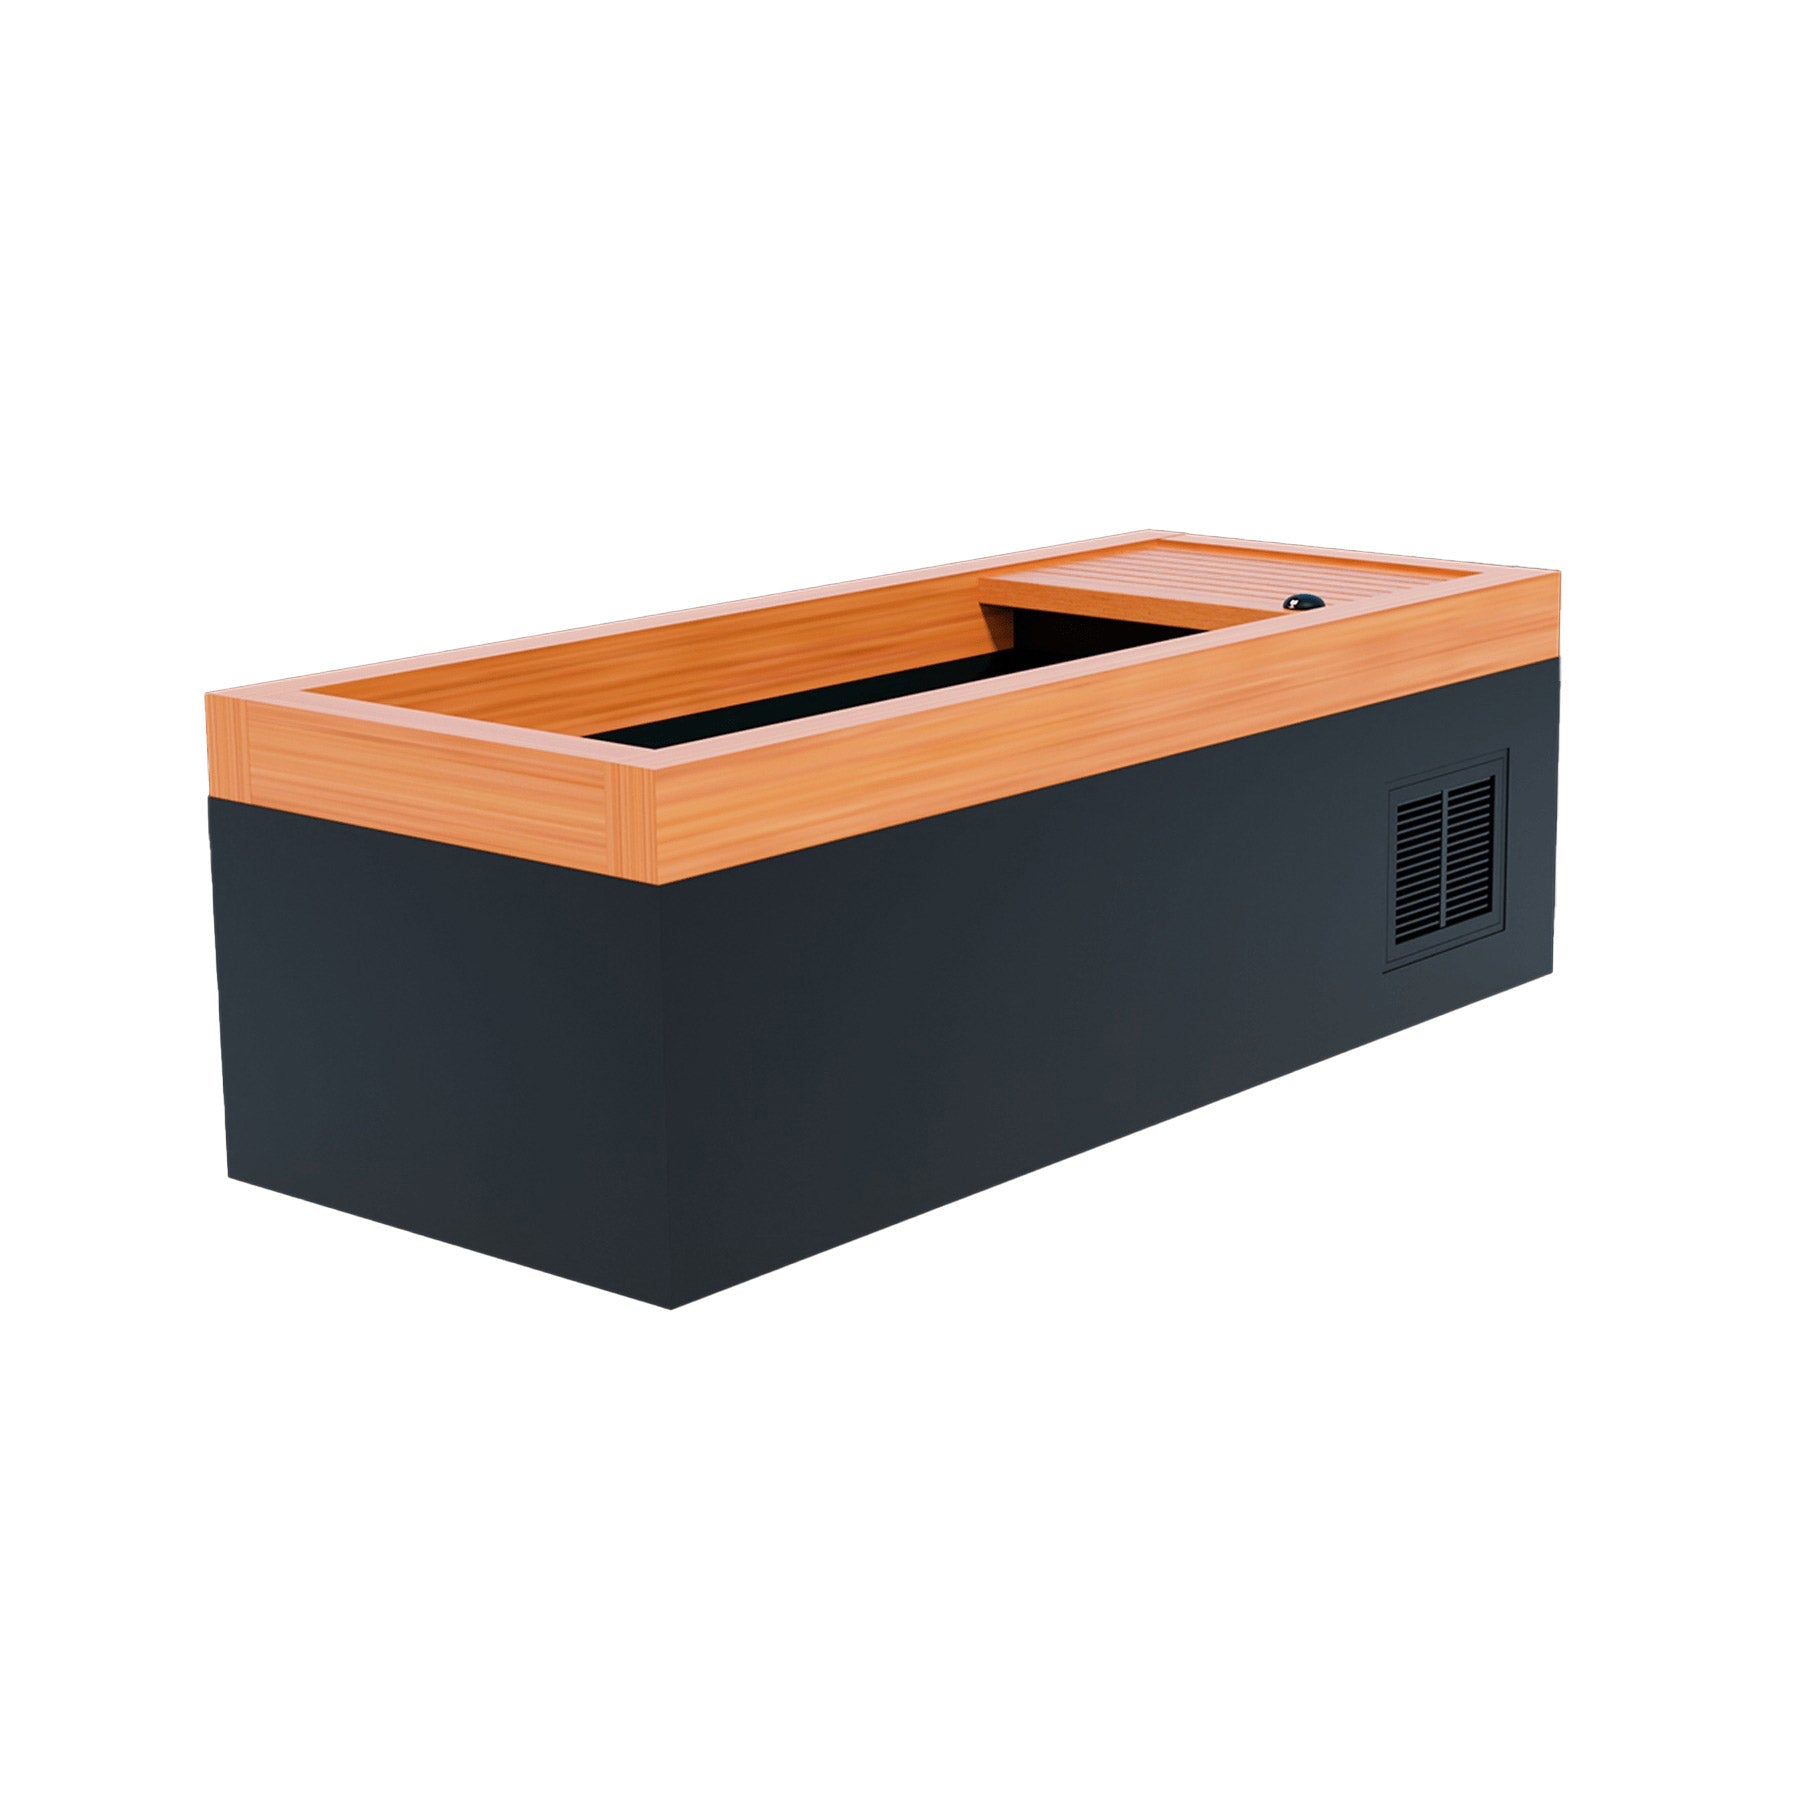 A black Medical Sauna box with a wooden top, infused with essential oils.